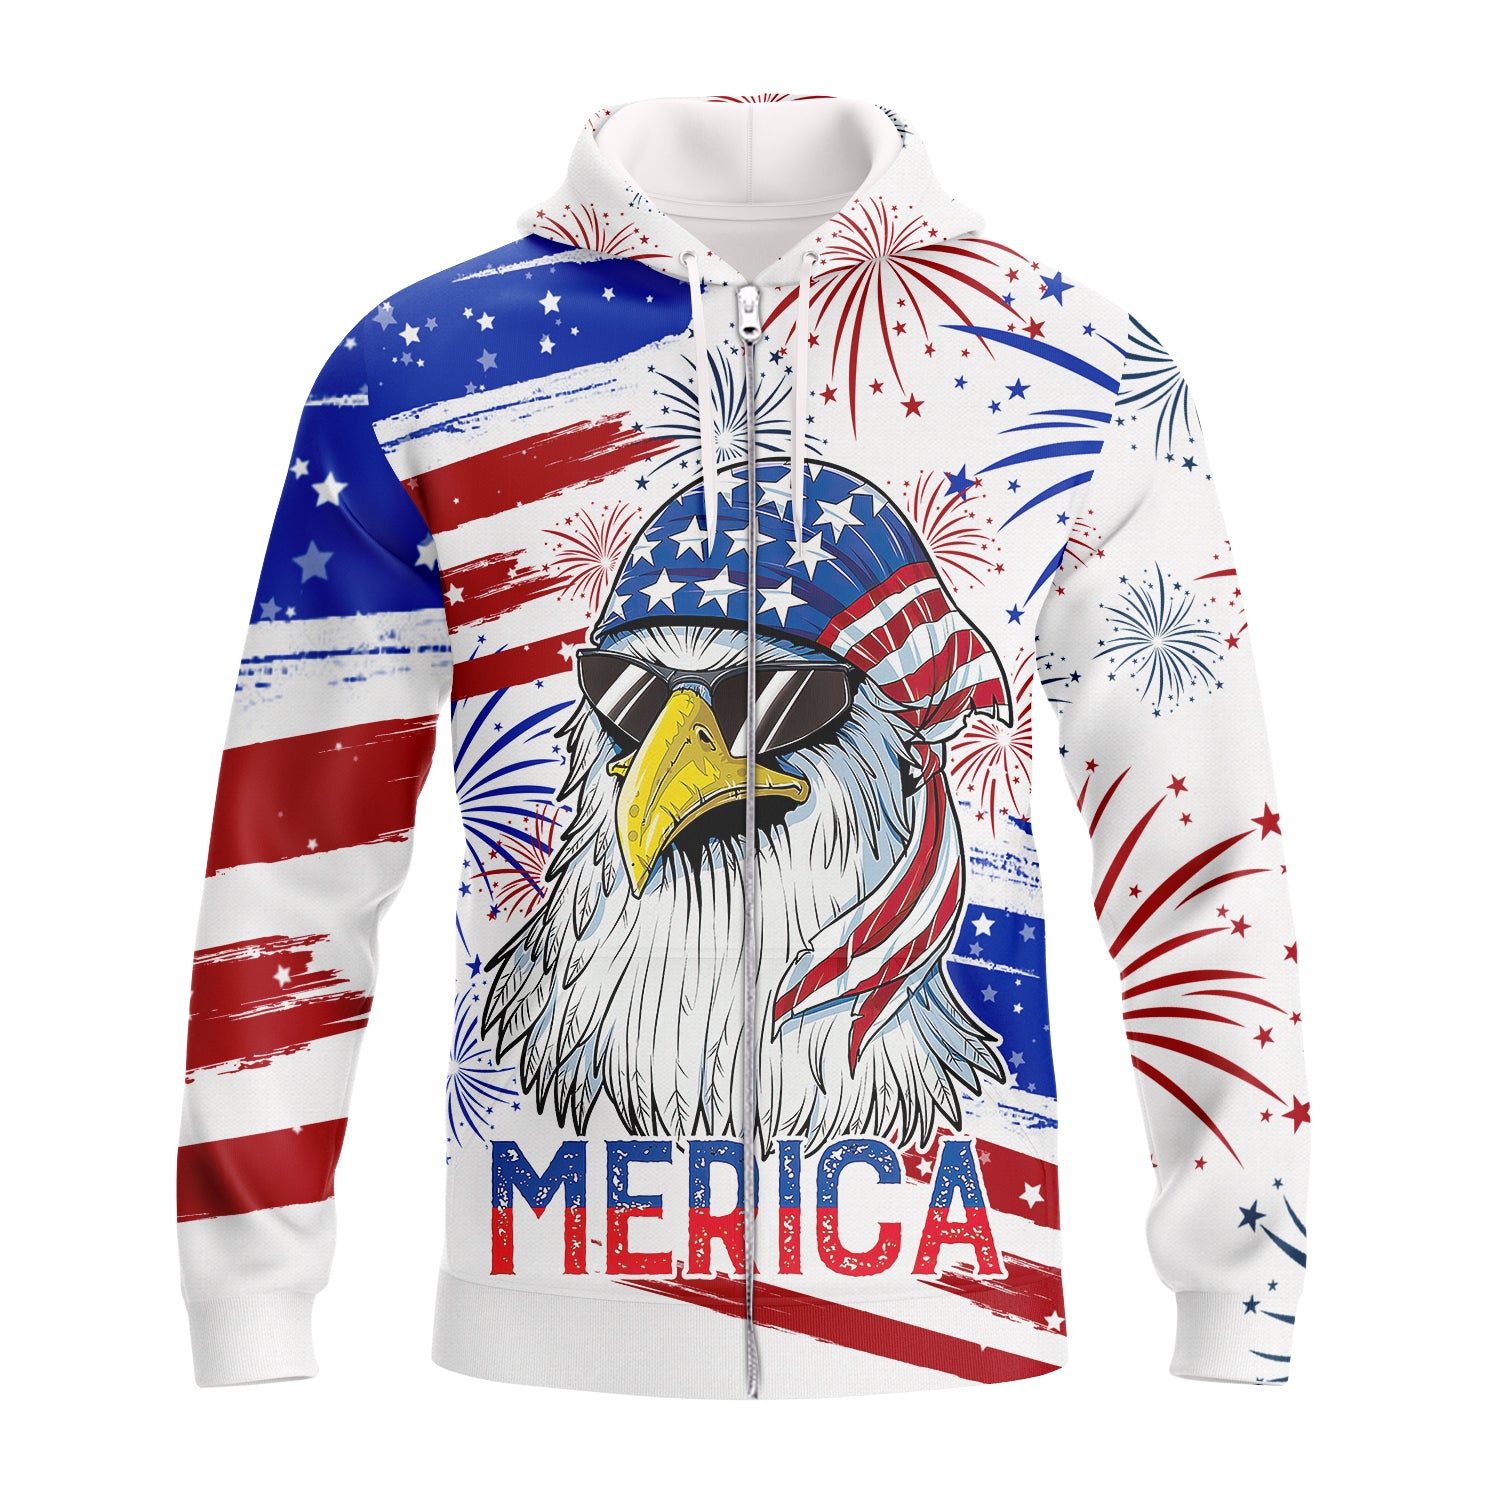 Independence Day Is Coming Ealge Merica 3D Full Print NA93